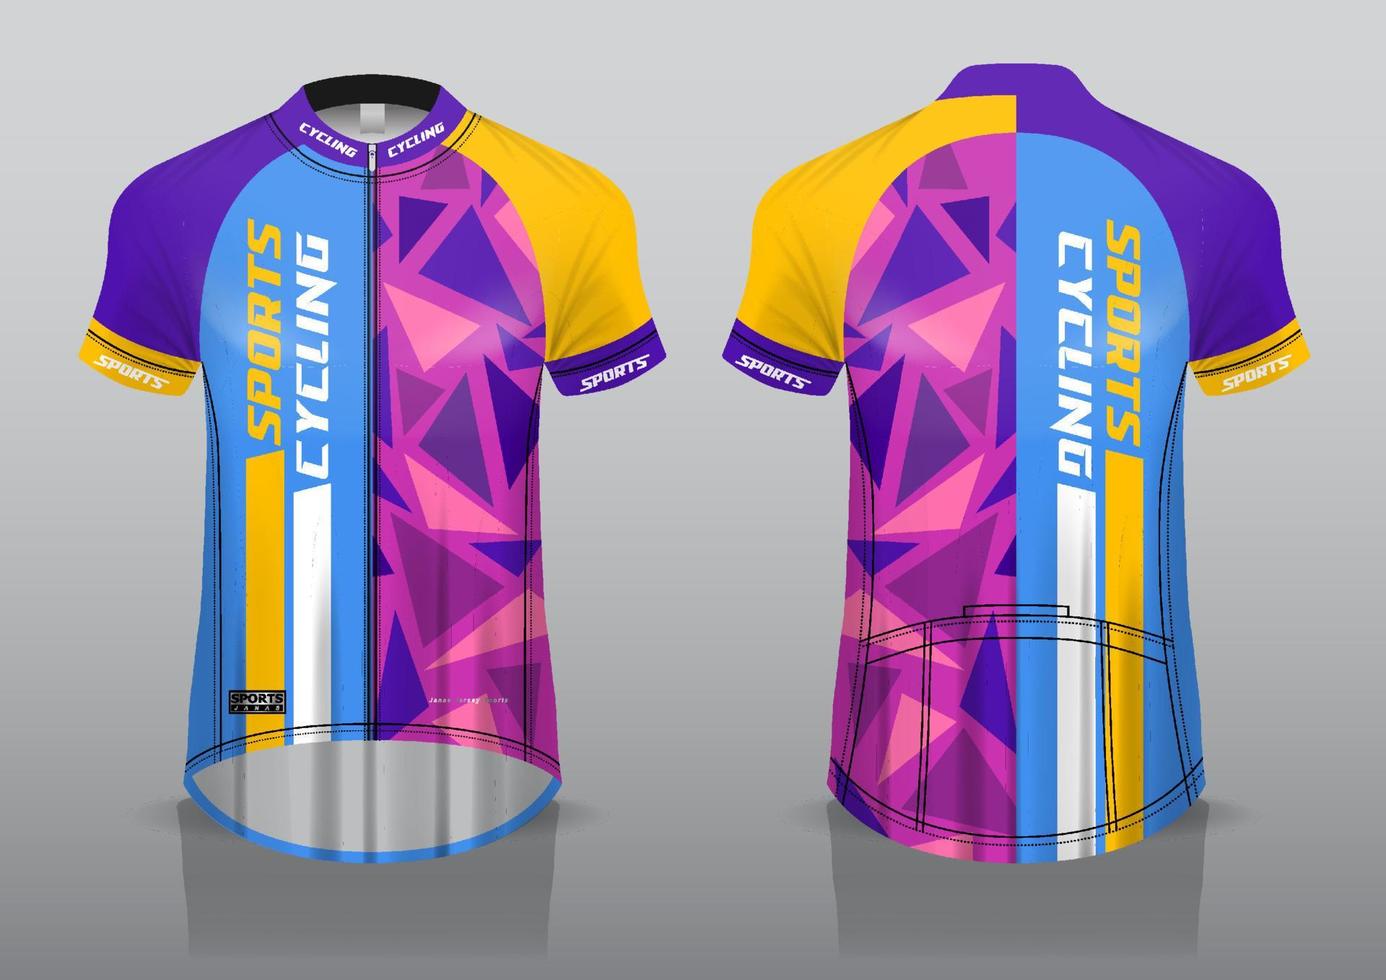 jersey design for cycling, front and back view, and easy to edit and print on fabric, sportswear for cycling teams vector